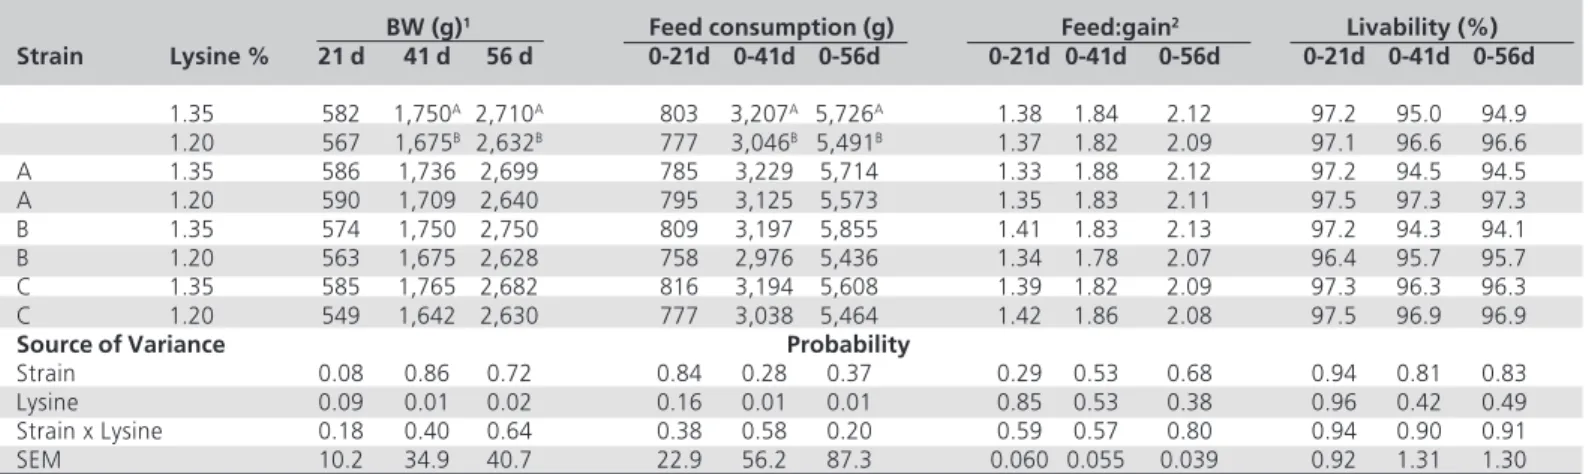 Table 2 - Effects of strain cross and starter-lysine level on BW, feed intake, feed conversion, and livability of female broilers at 21, 41 and 56 d of age.